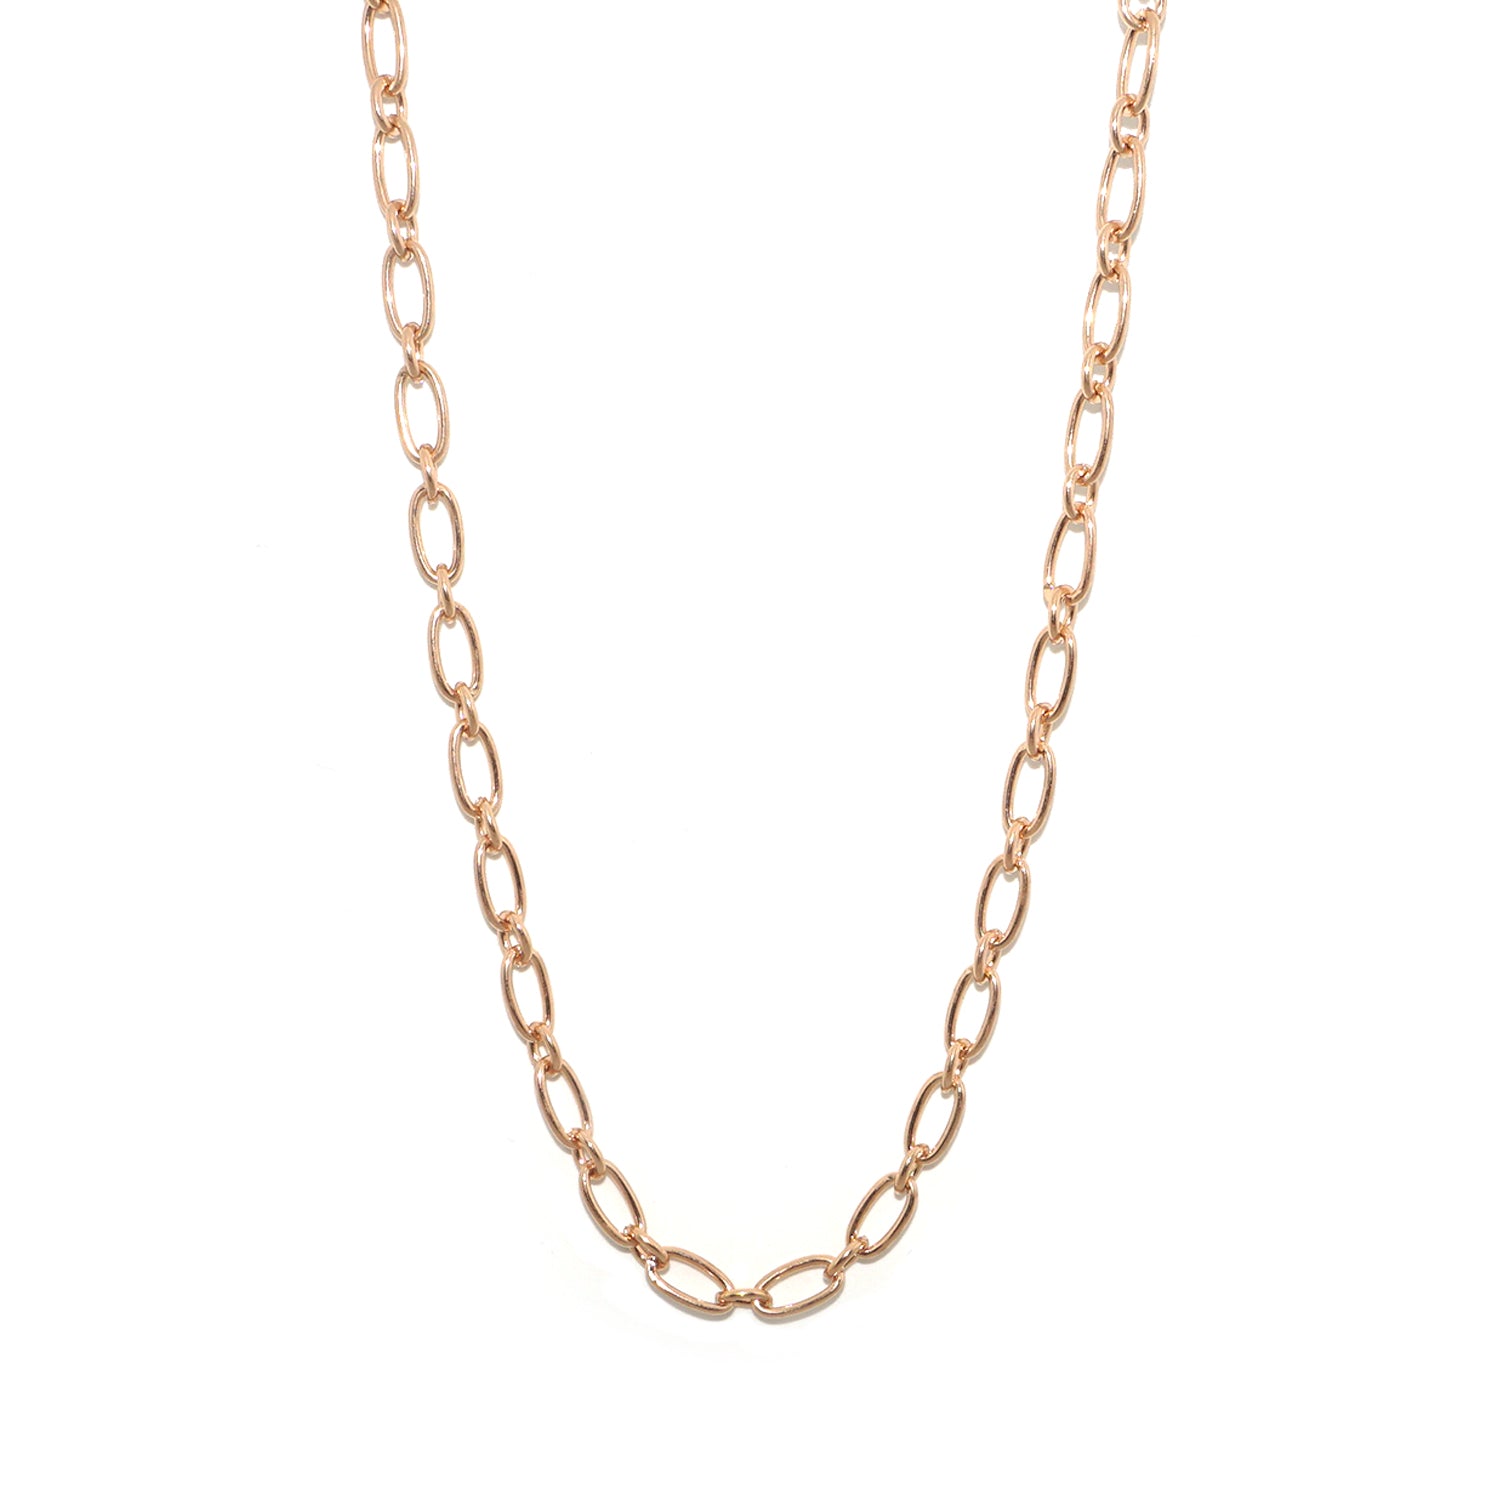 16" chain necklace for clasp charms